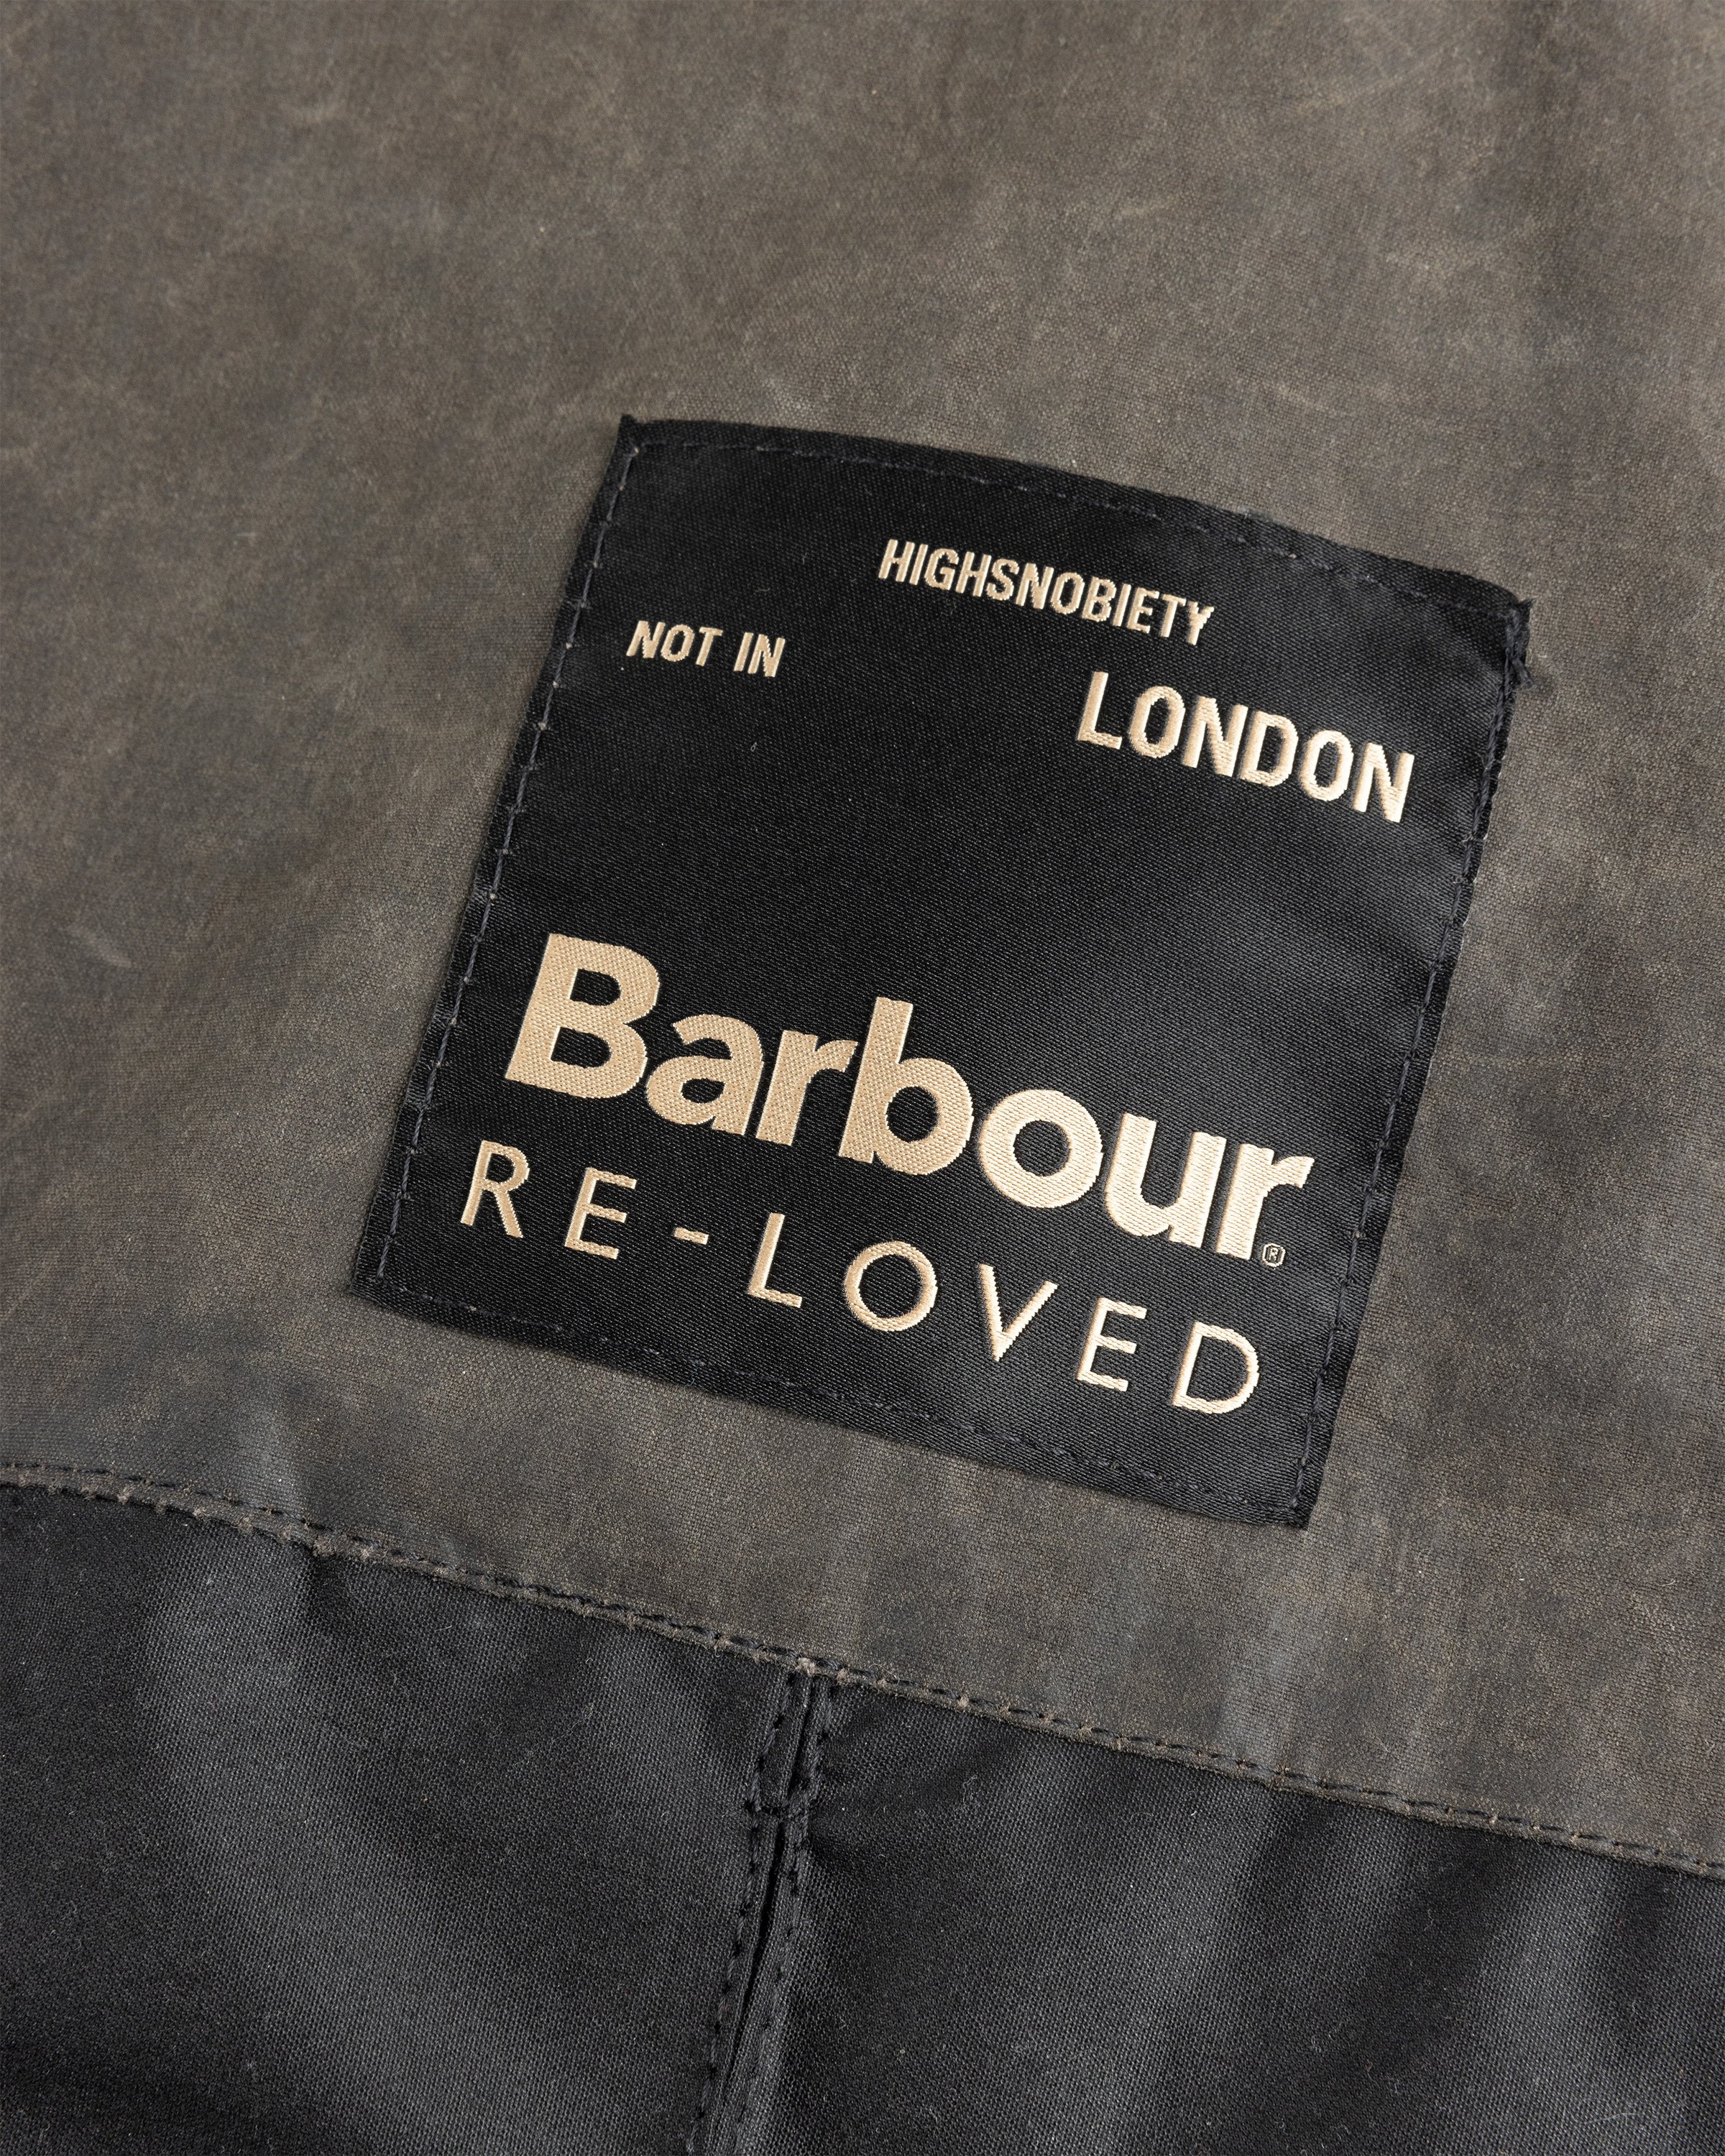 Barbour x Highsnobiety - Re-Loved Cropped Bedale Jacket 1 - 38 - Black - Clothing -  - Image 4